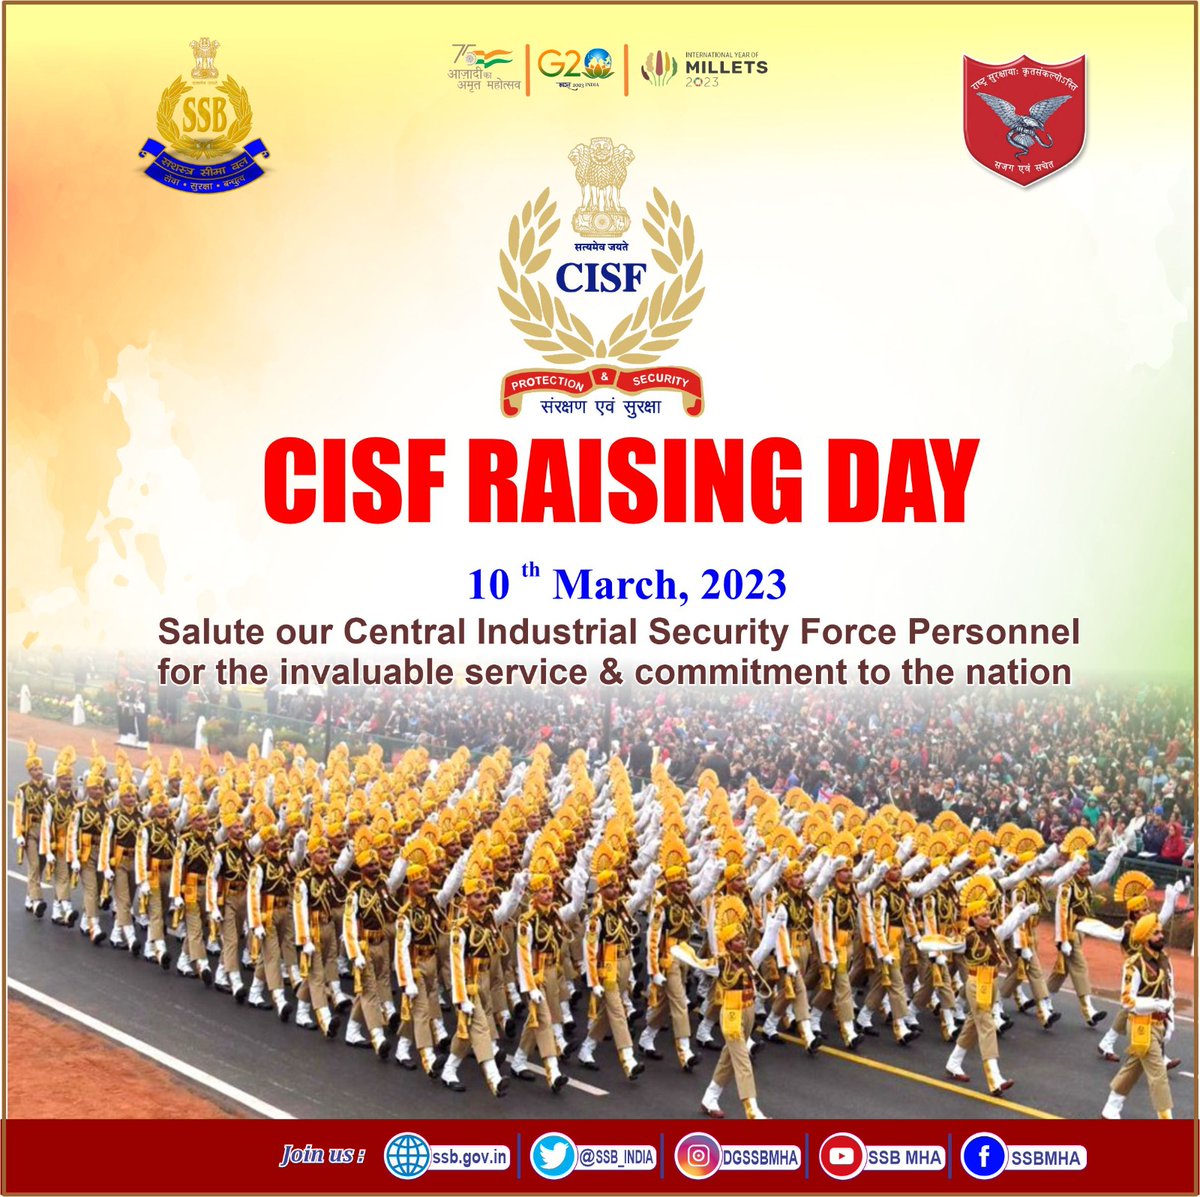 Smt. Rashmi Shukla, IPS #DGSSB and All Ranks of #SSB convey best wishes to All Ranks and Families of @CISFHQrs on the occasion of their 54th Raising Day. 

@PMOIndia
@HMOIndia
#PROTECTIONandSECURITY